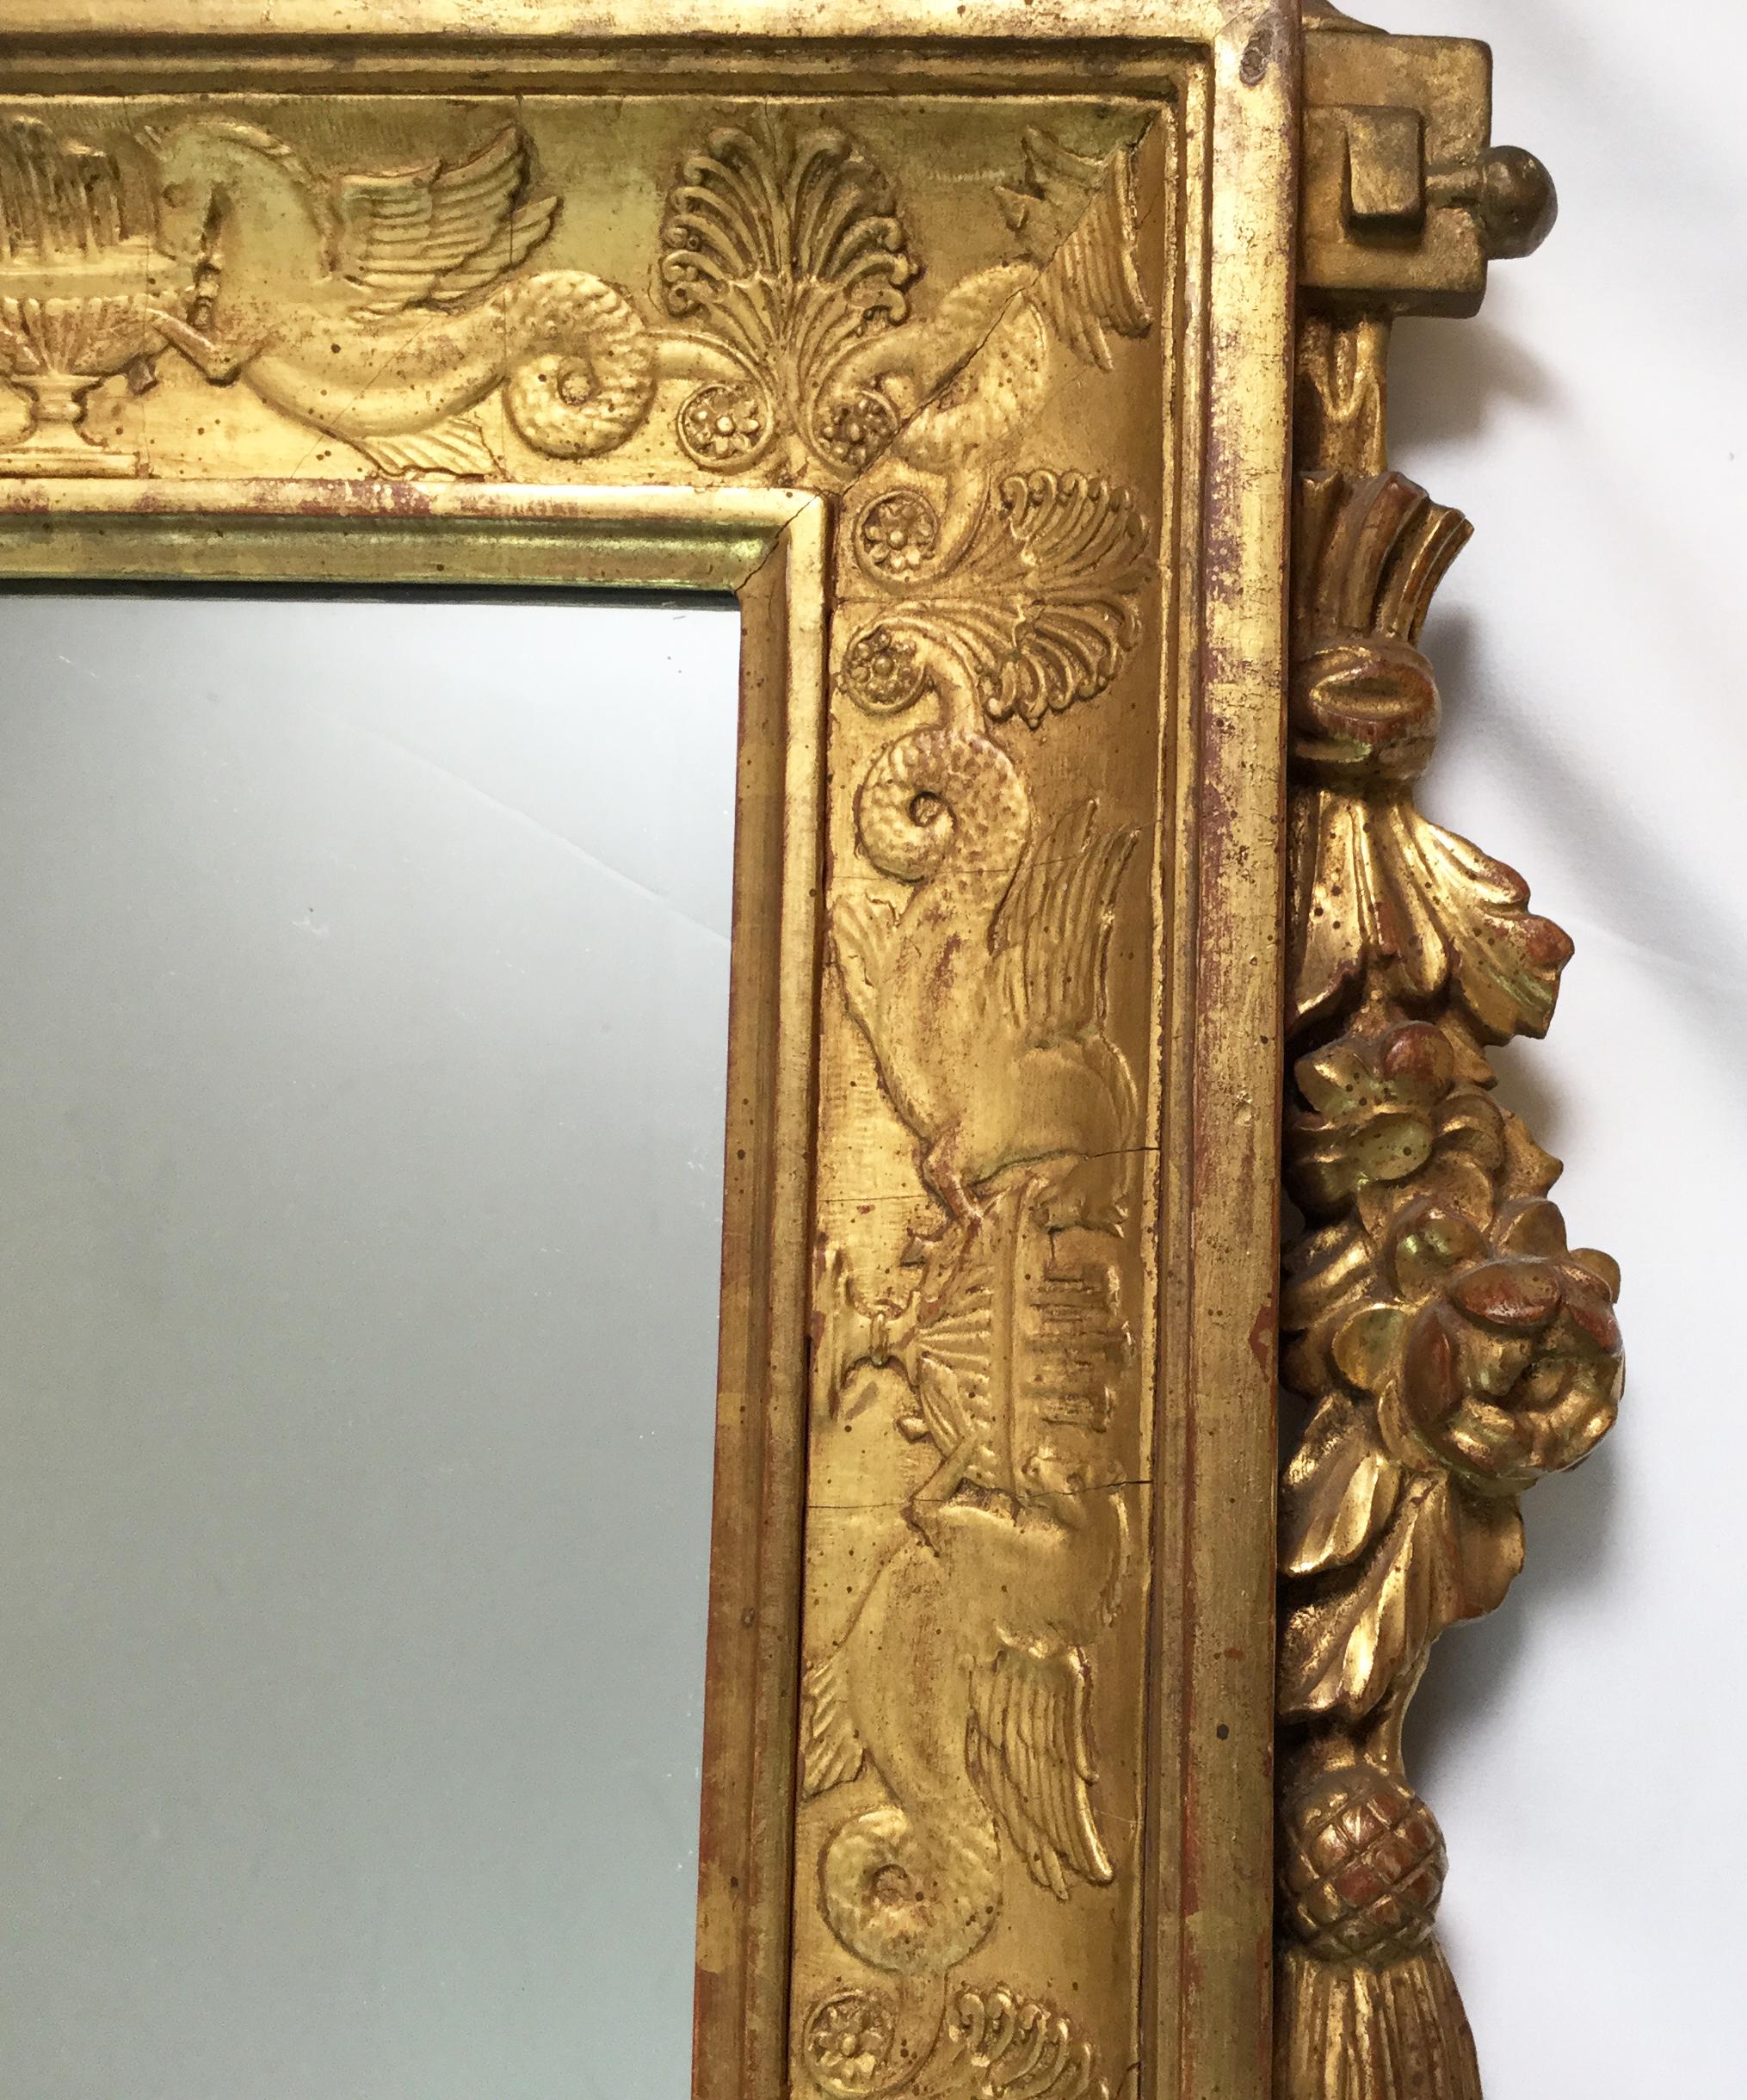 20th Century French Empire Napoleonic Style Giltwood Mirror with Eagles